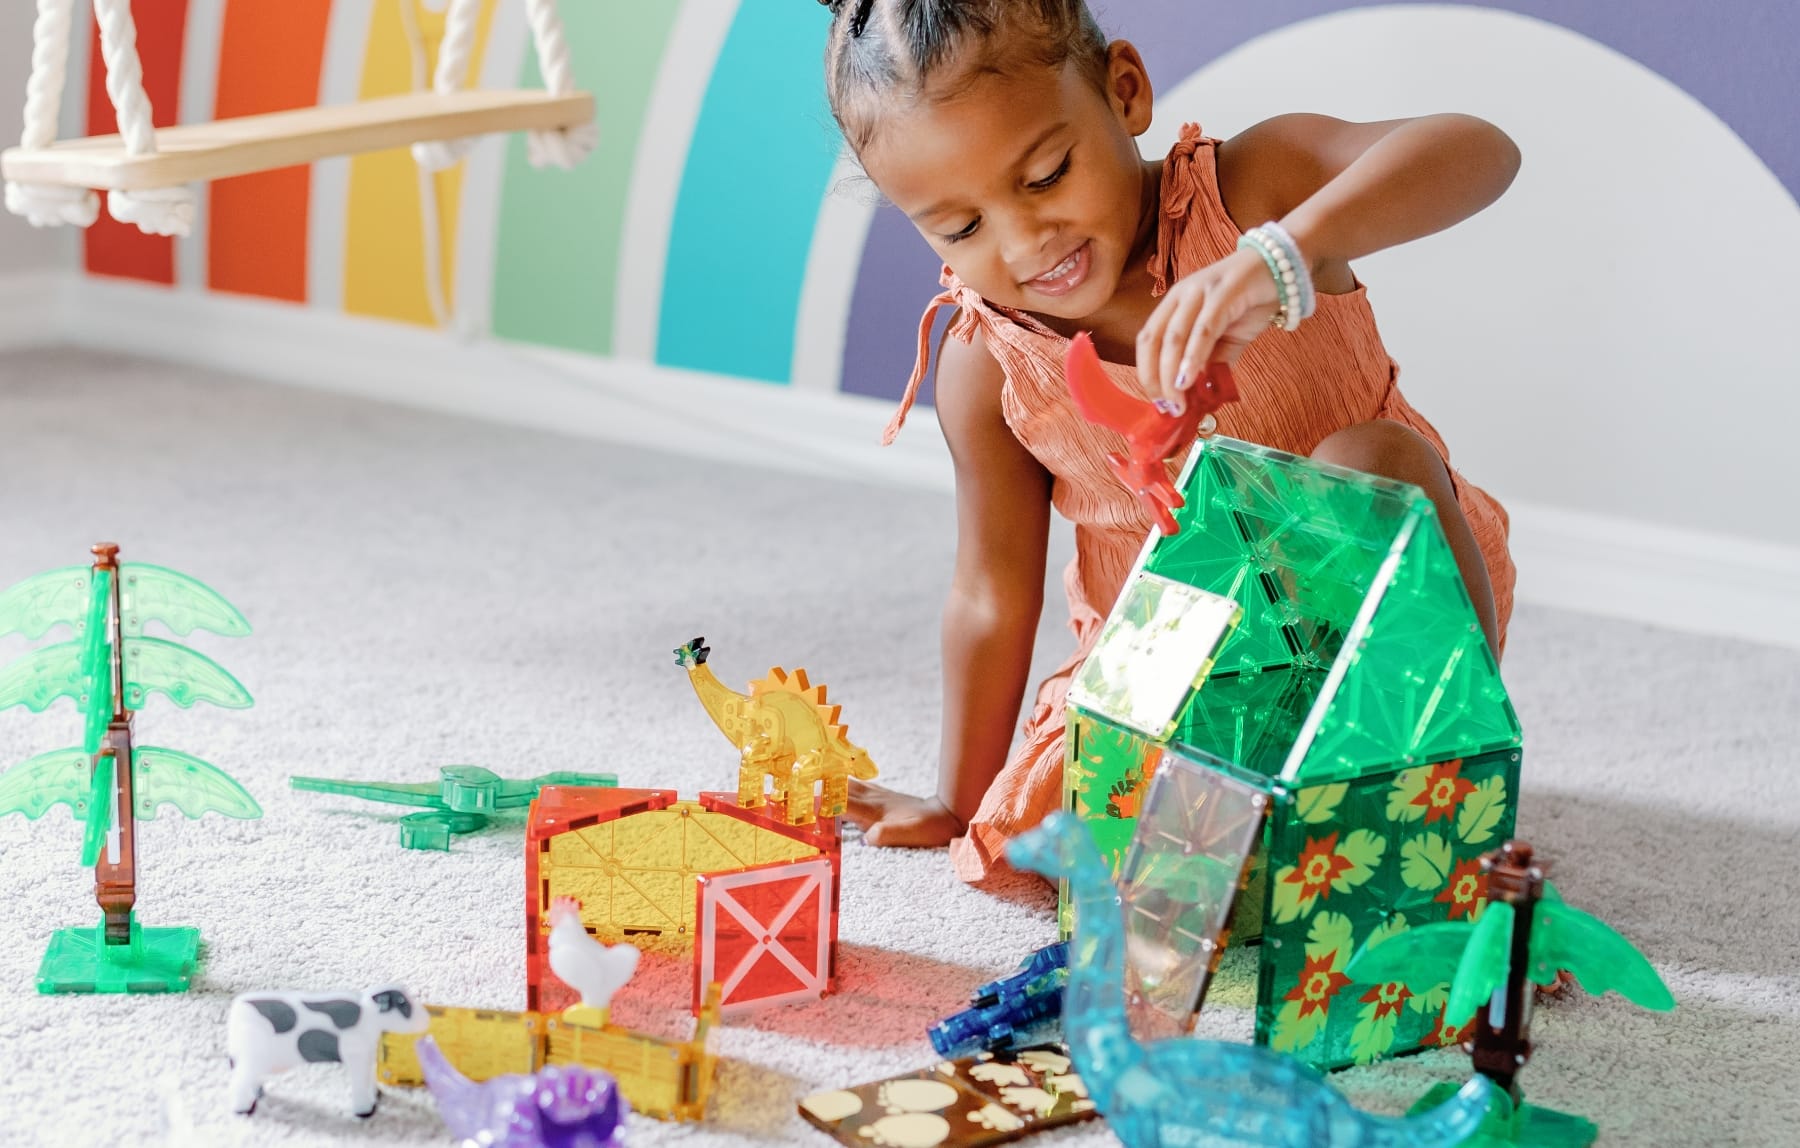 The Best Building Toys, Blocks, and Magnetic Tiles for Budding